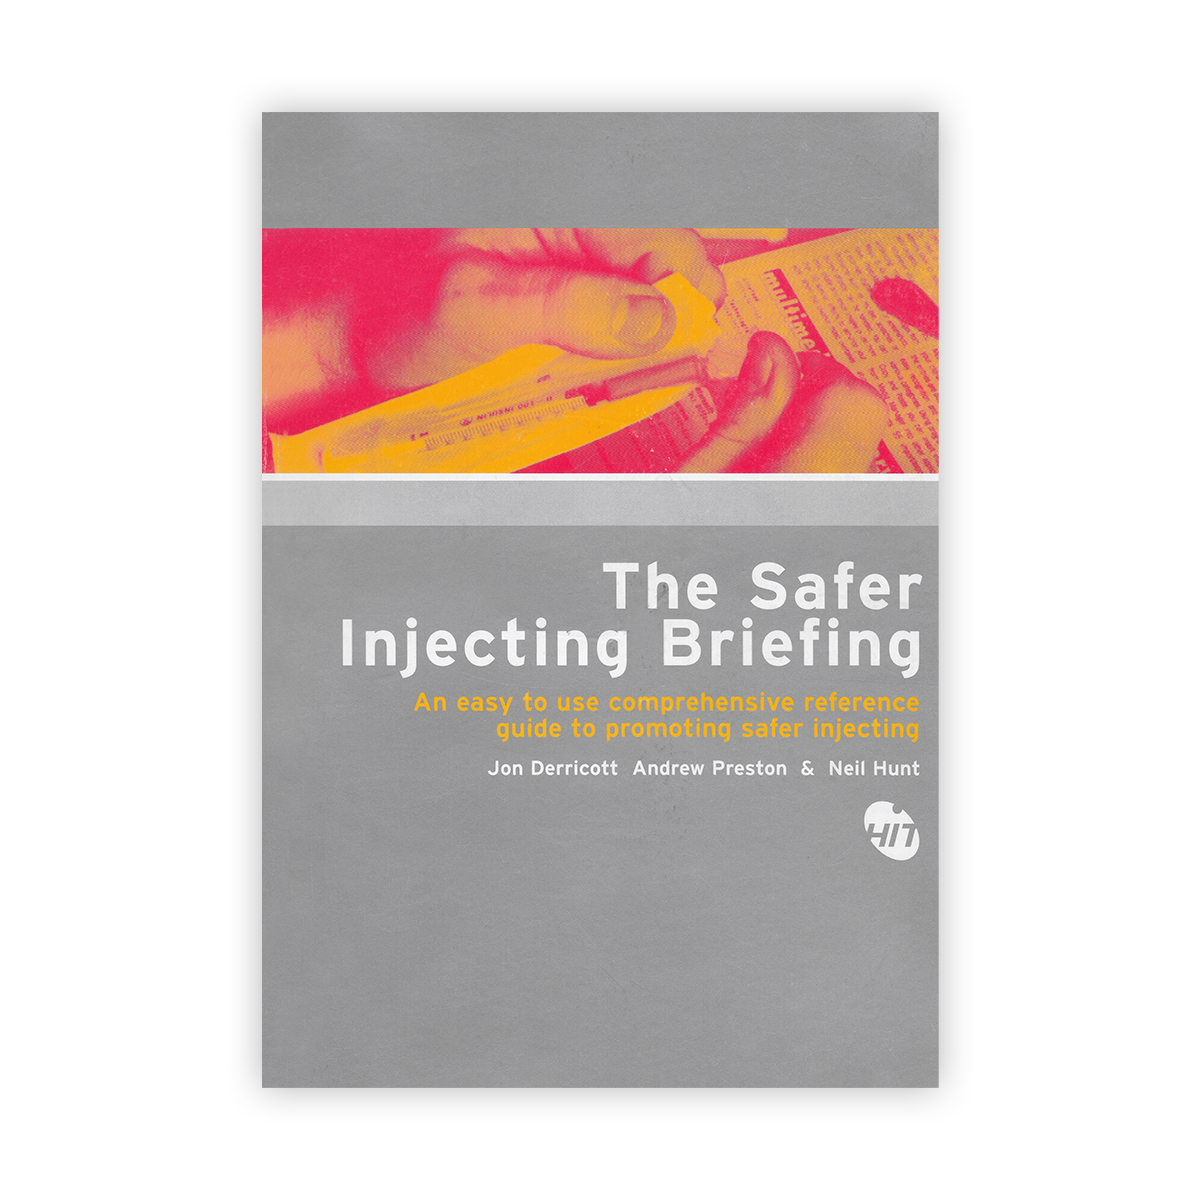 The Safer Injecting Briefing (pdf)